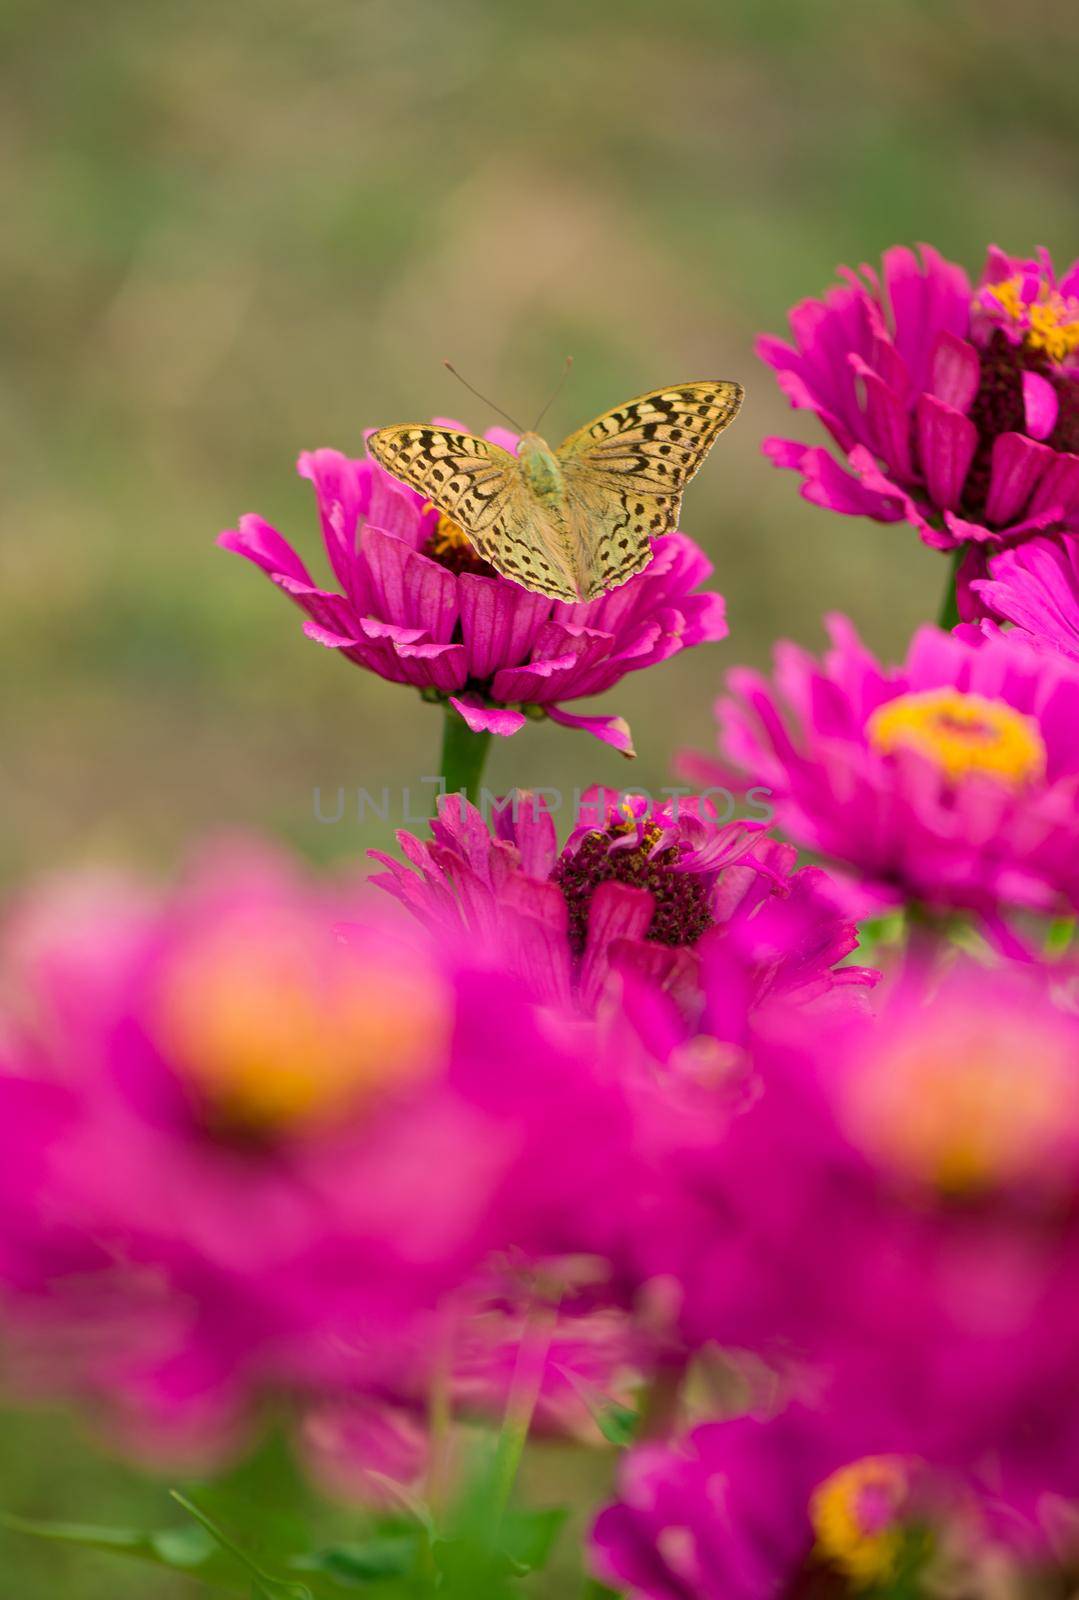 Closed up Butterfly on flower -Blur flower background